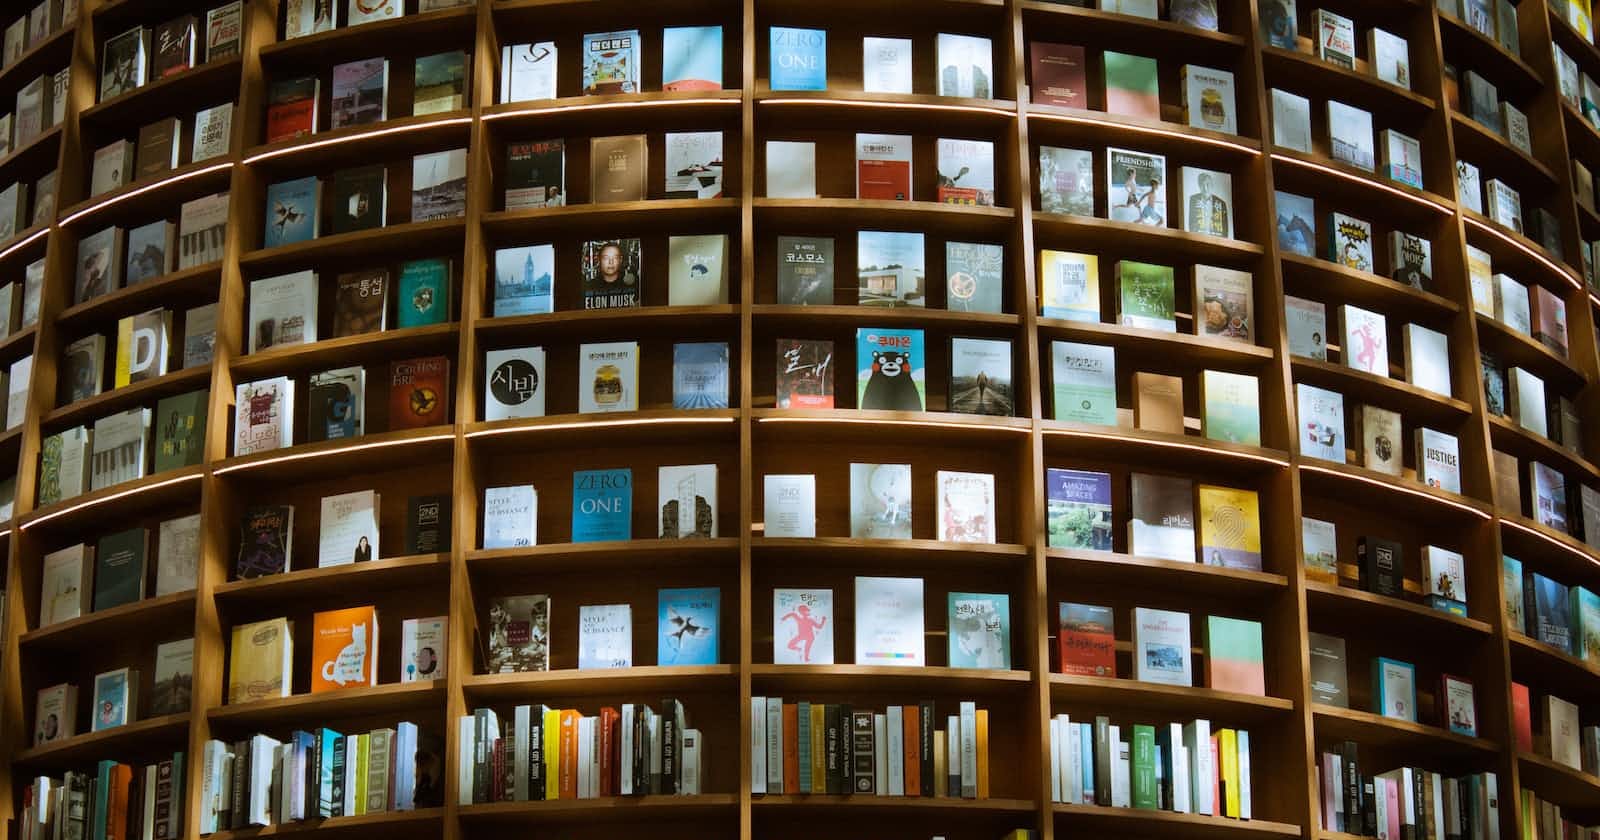 Building a book shelf with html and css